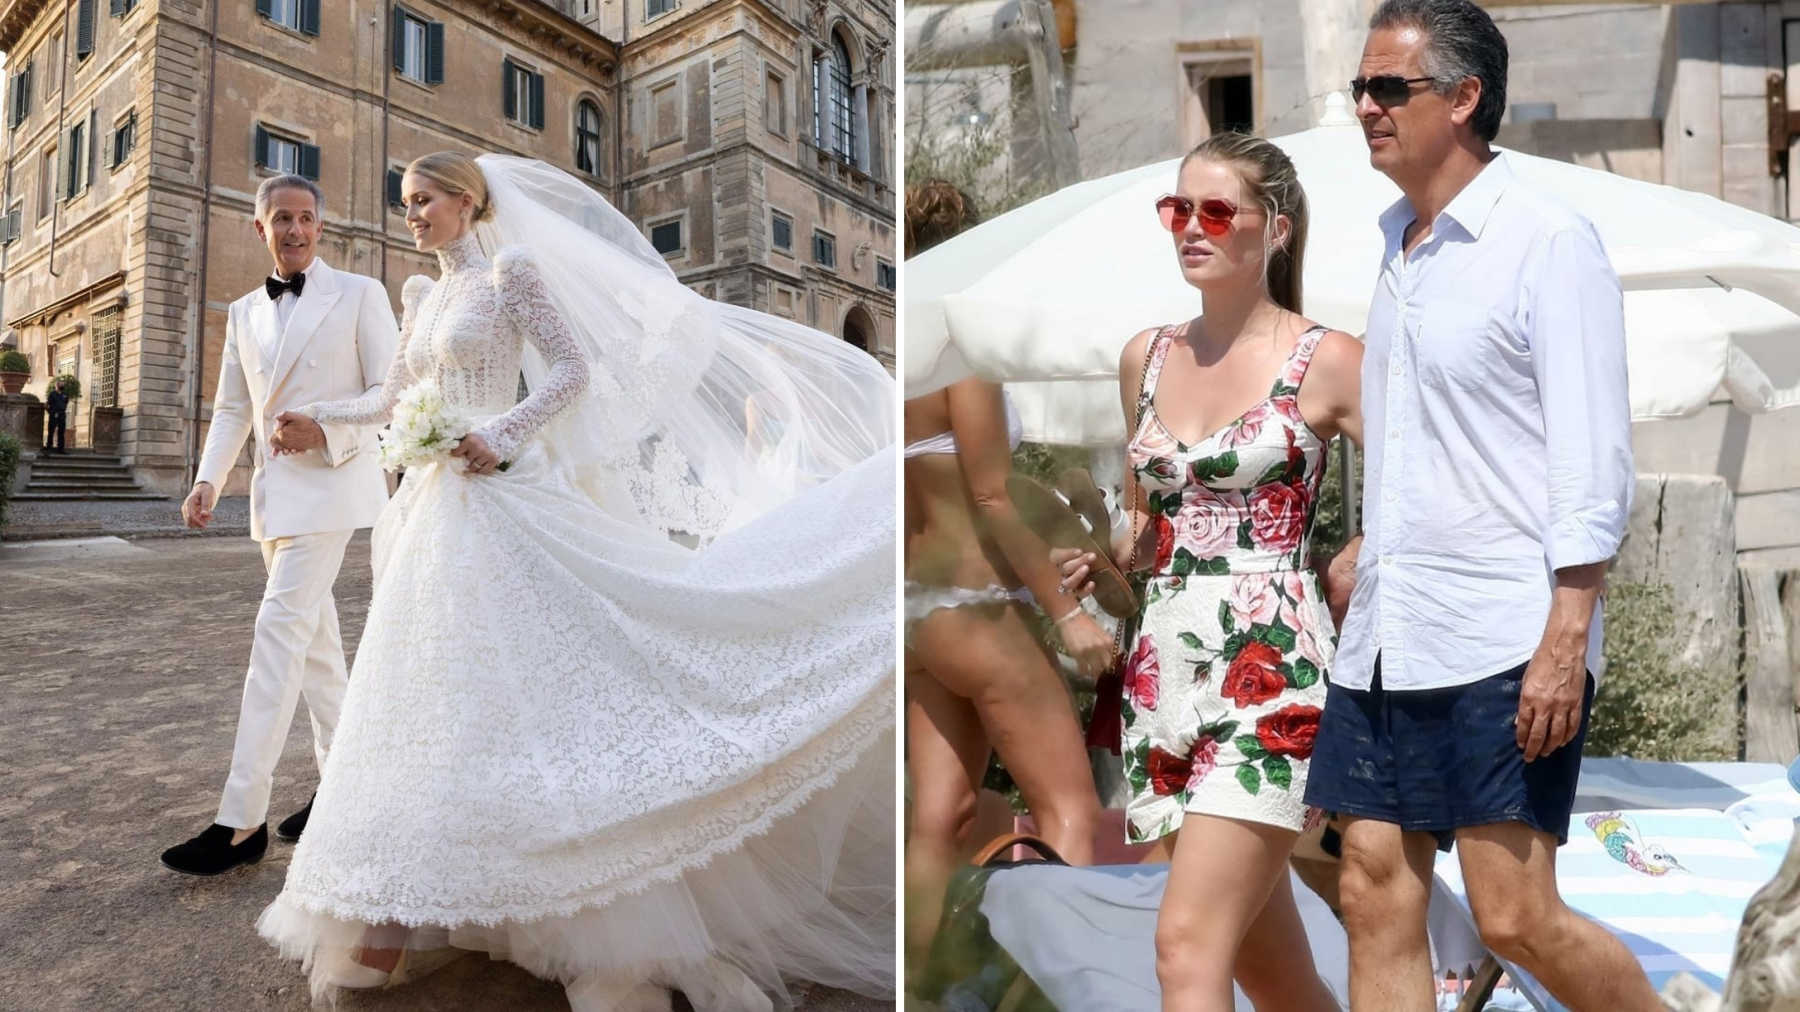 Princess Dianas Niece Lady Kitty Spencer Gets Married In Luxe Italian ...